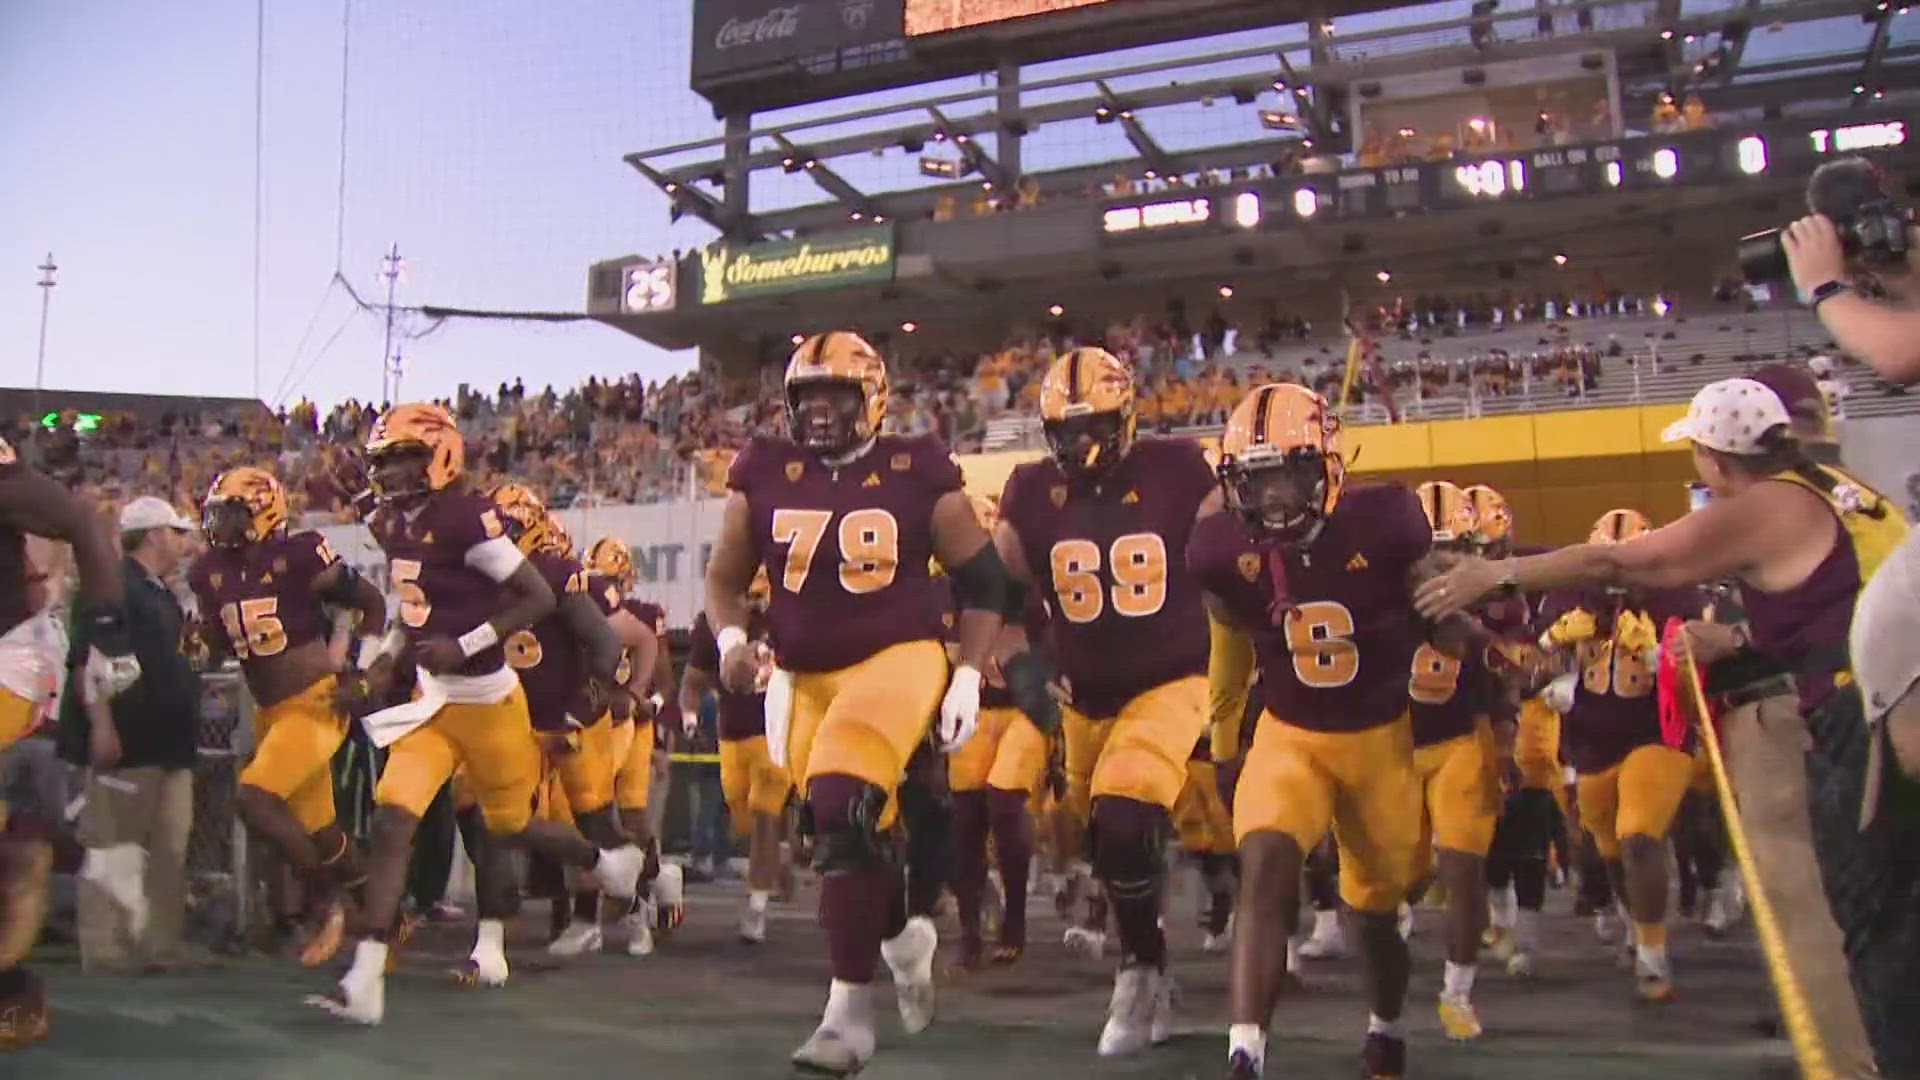 Utah vs Arizona State Football Game - A Glimpse of Intense Competition, Latest Year